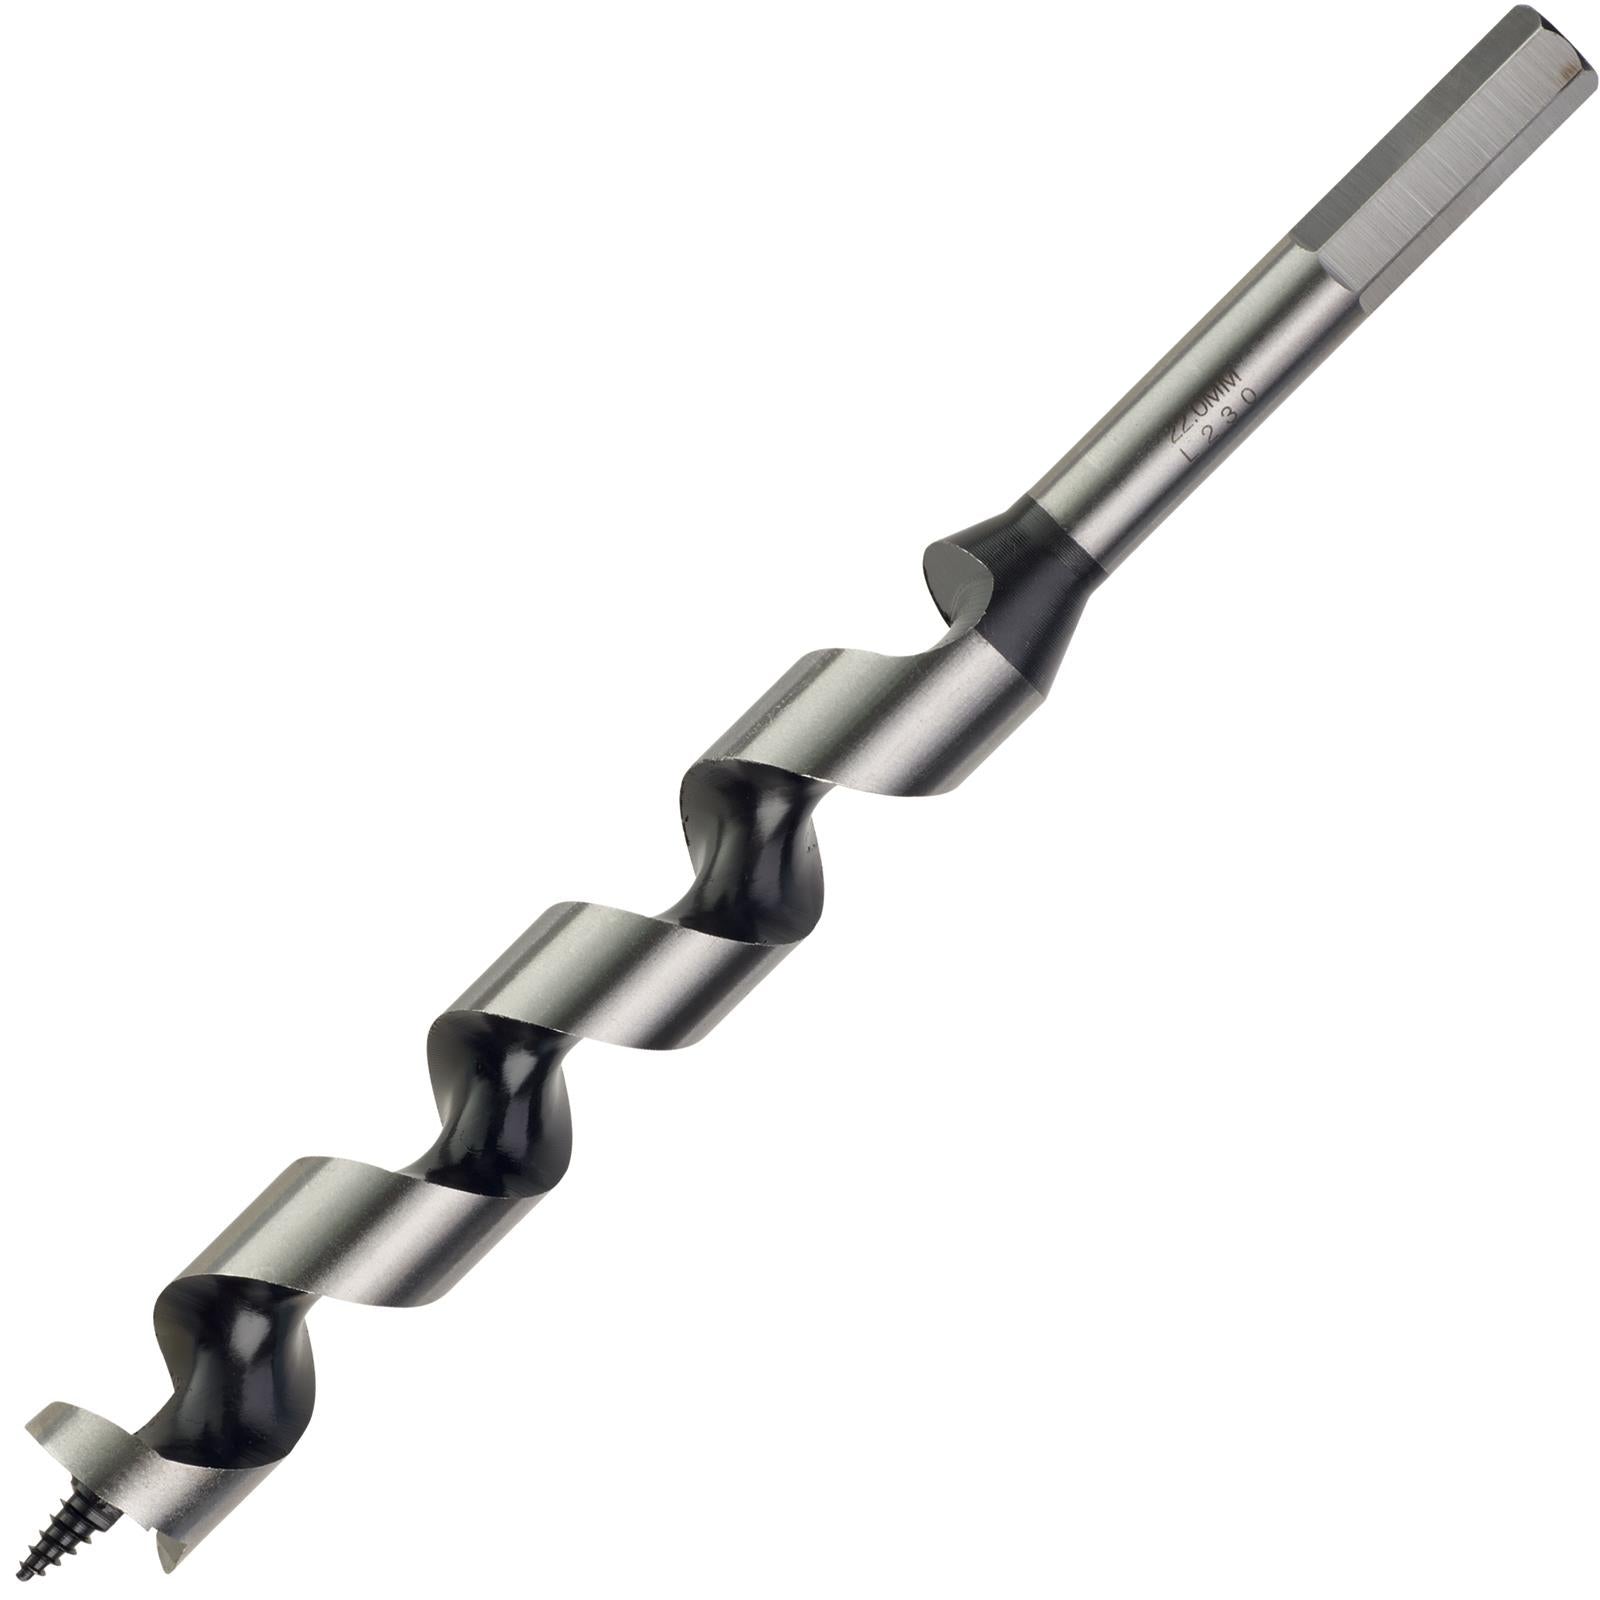 Milwaukee Wood Auger Drill Bits 230mm Overall Length